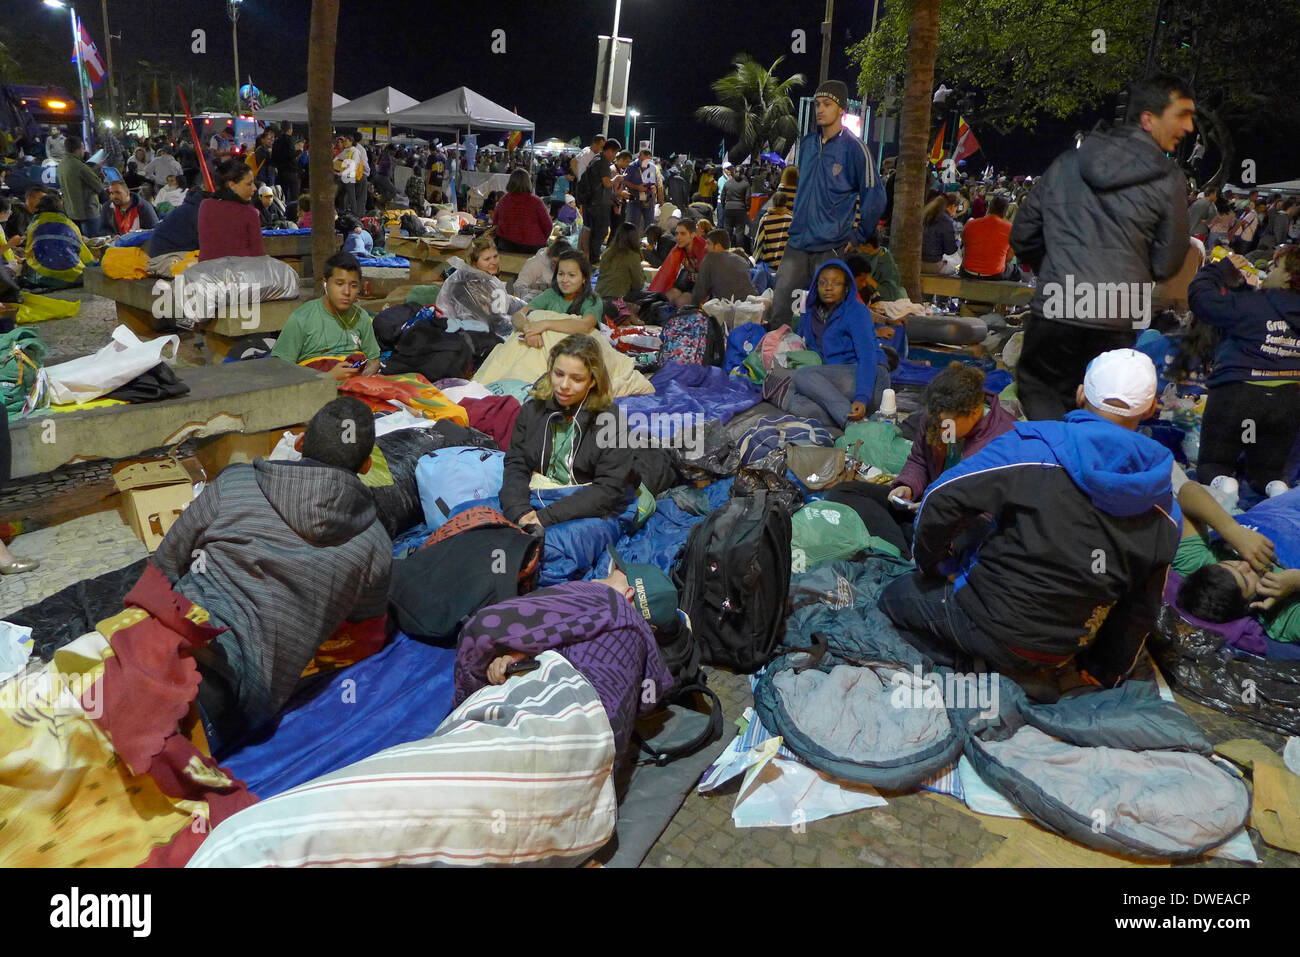 Pilgrims camped out on the streets of Copacabana for the all night Saturday vigil, leading to final mass on Sunday 28/6/13 Stock Photo